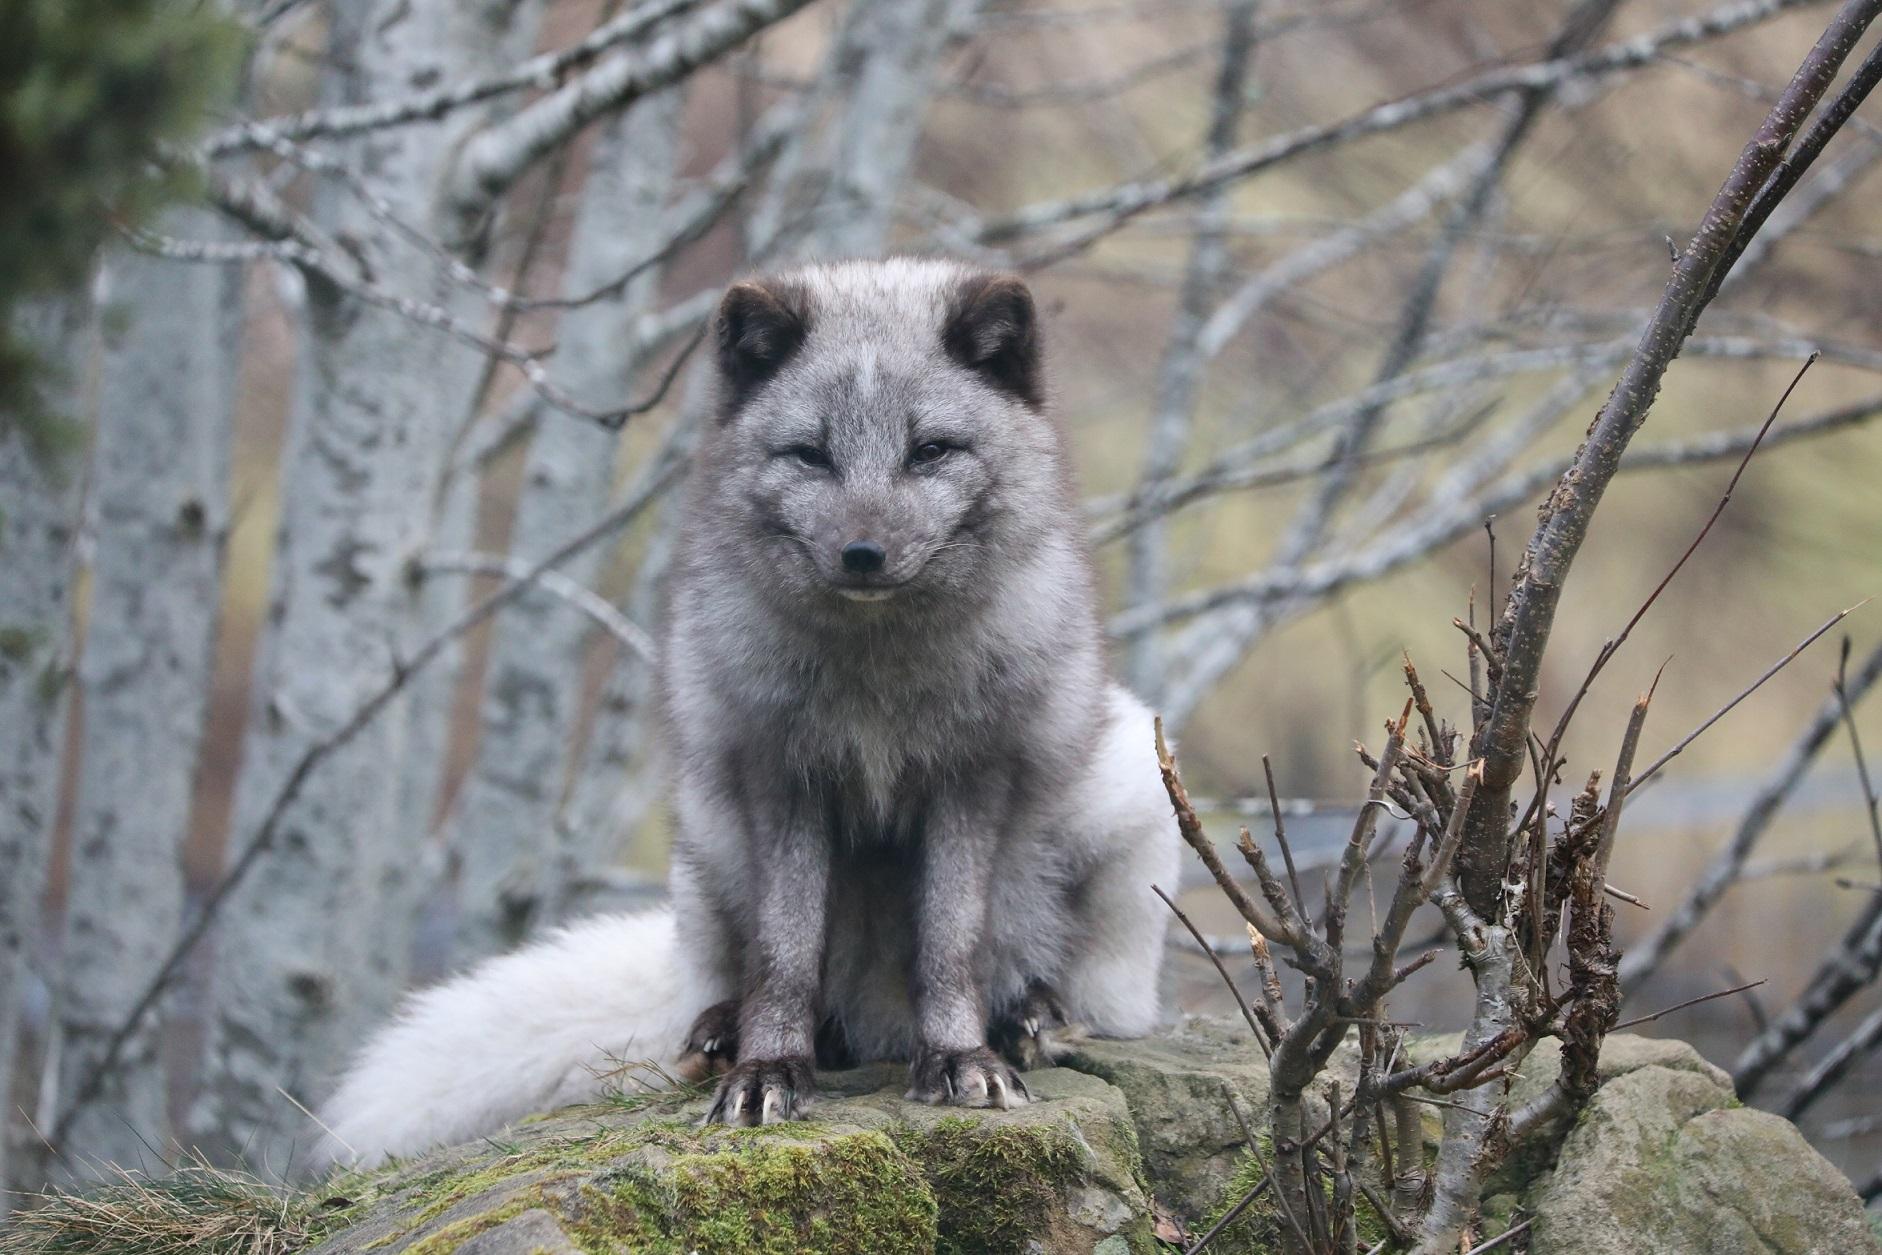 Arctic fox sitting amongst trees and branches Image: Amy Middleton 2022